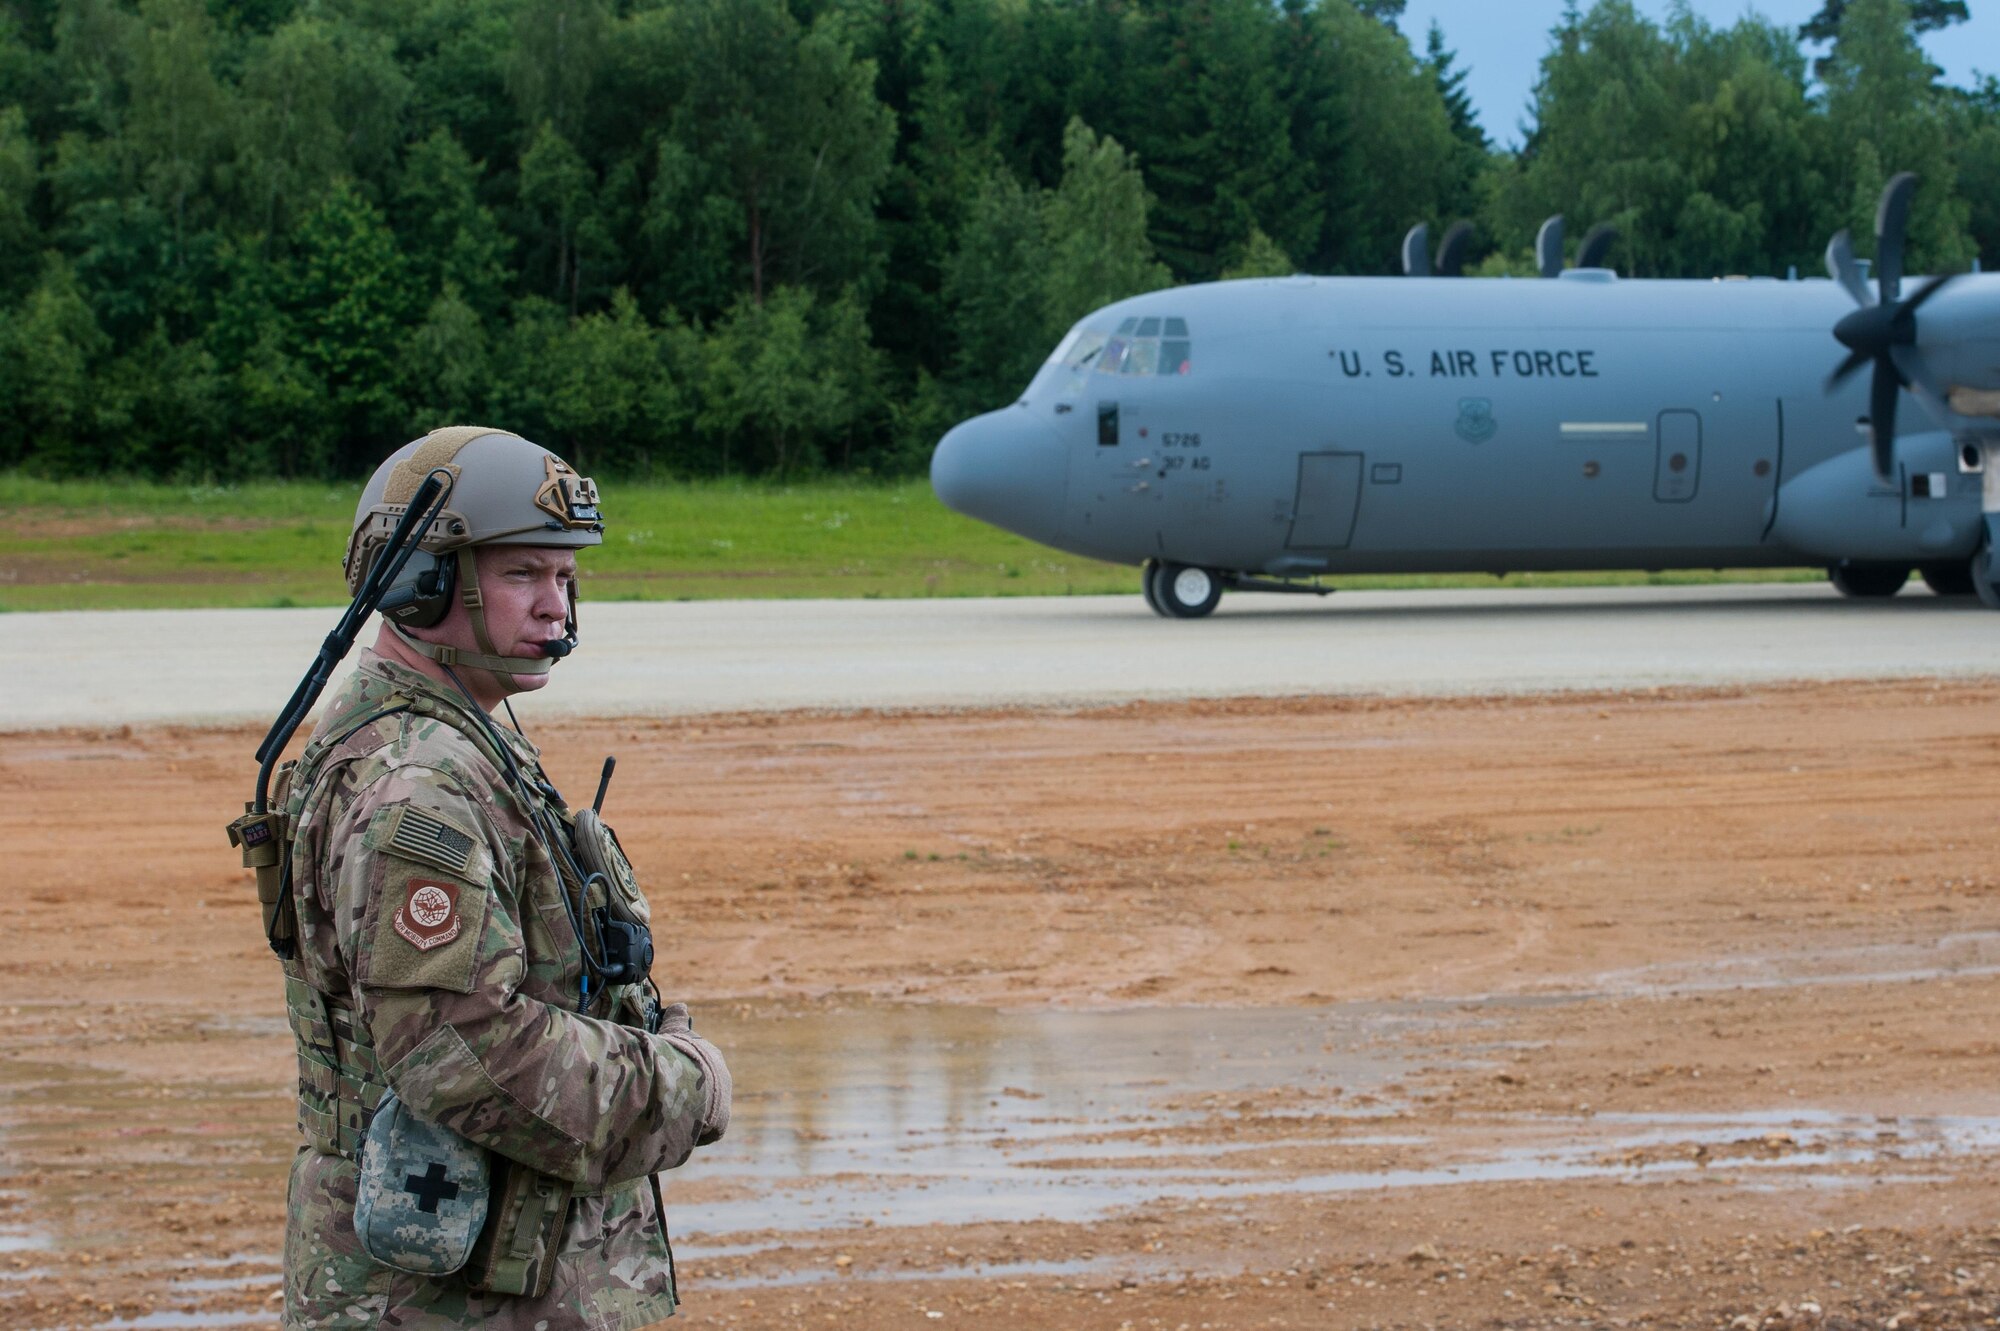 U.S. Air Force Maj. Aaron Cook, 621st Mobility Support Operations Squadron Air Mobility Liaison Officer to the 2nd Cavalry Regiment/Joint Multinational Training Center, radios a U.S. Air Force C-130J Super Hercules pilot while the aircraft is being downloaded during Exercise Swift Response 16 at Hohenfels Training Area, Germany, June 17, 2016. Exercise SR16 is one of the premier military crisis response training events for multinational airborne forces in the world, the exercise has more than 5,000 participants from 10 NATO nations. (U.S. Air Force photo by Master Sgt. Joseph Swafford/Released) 